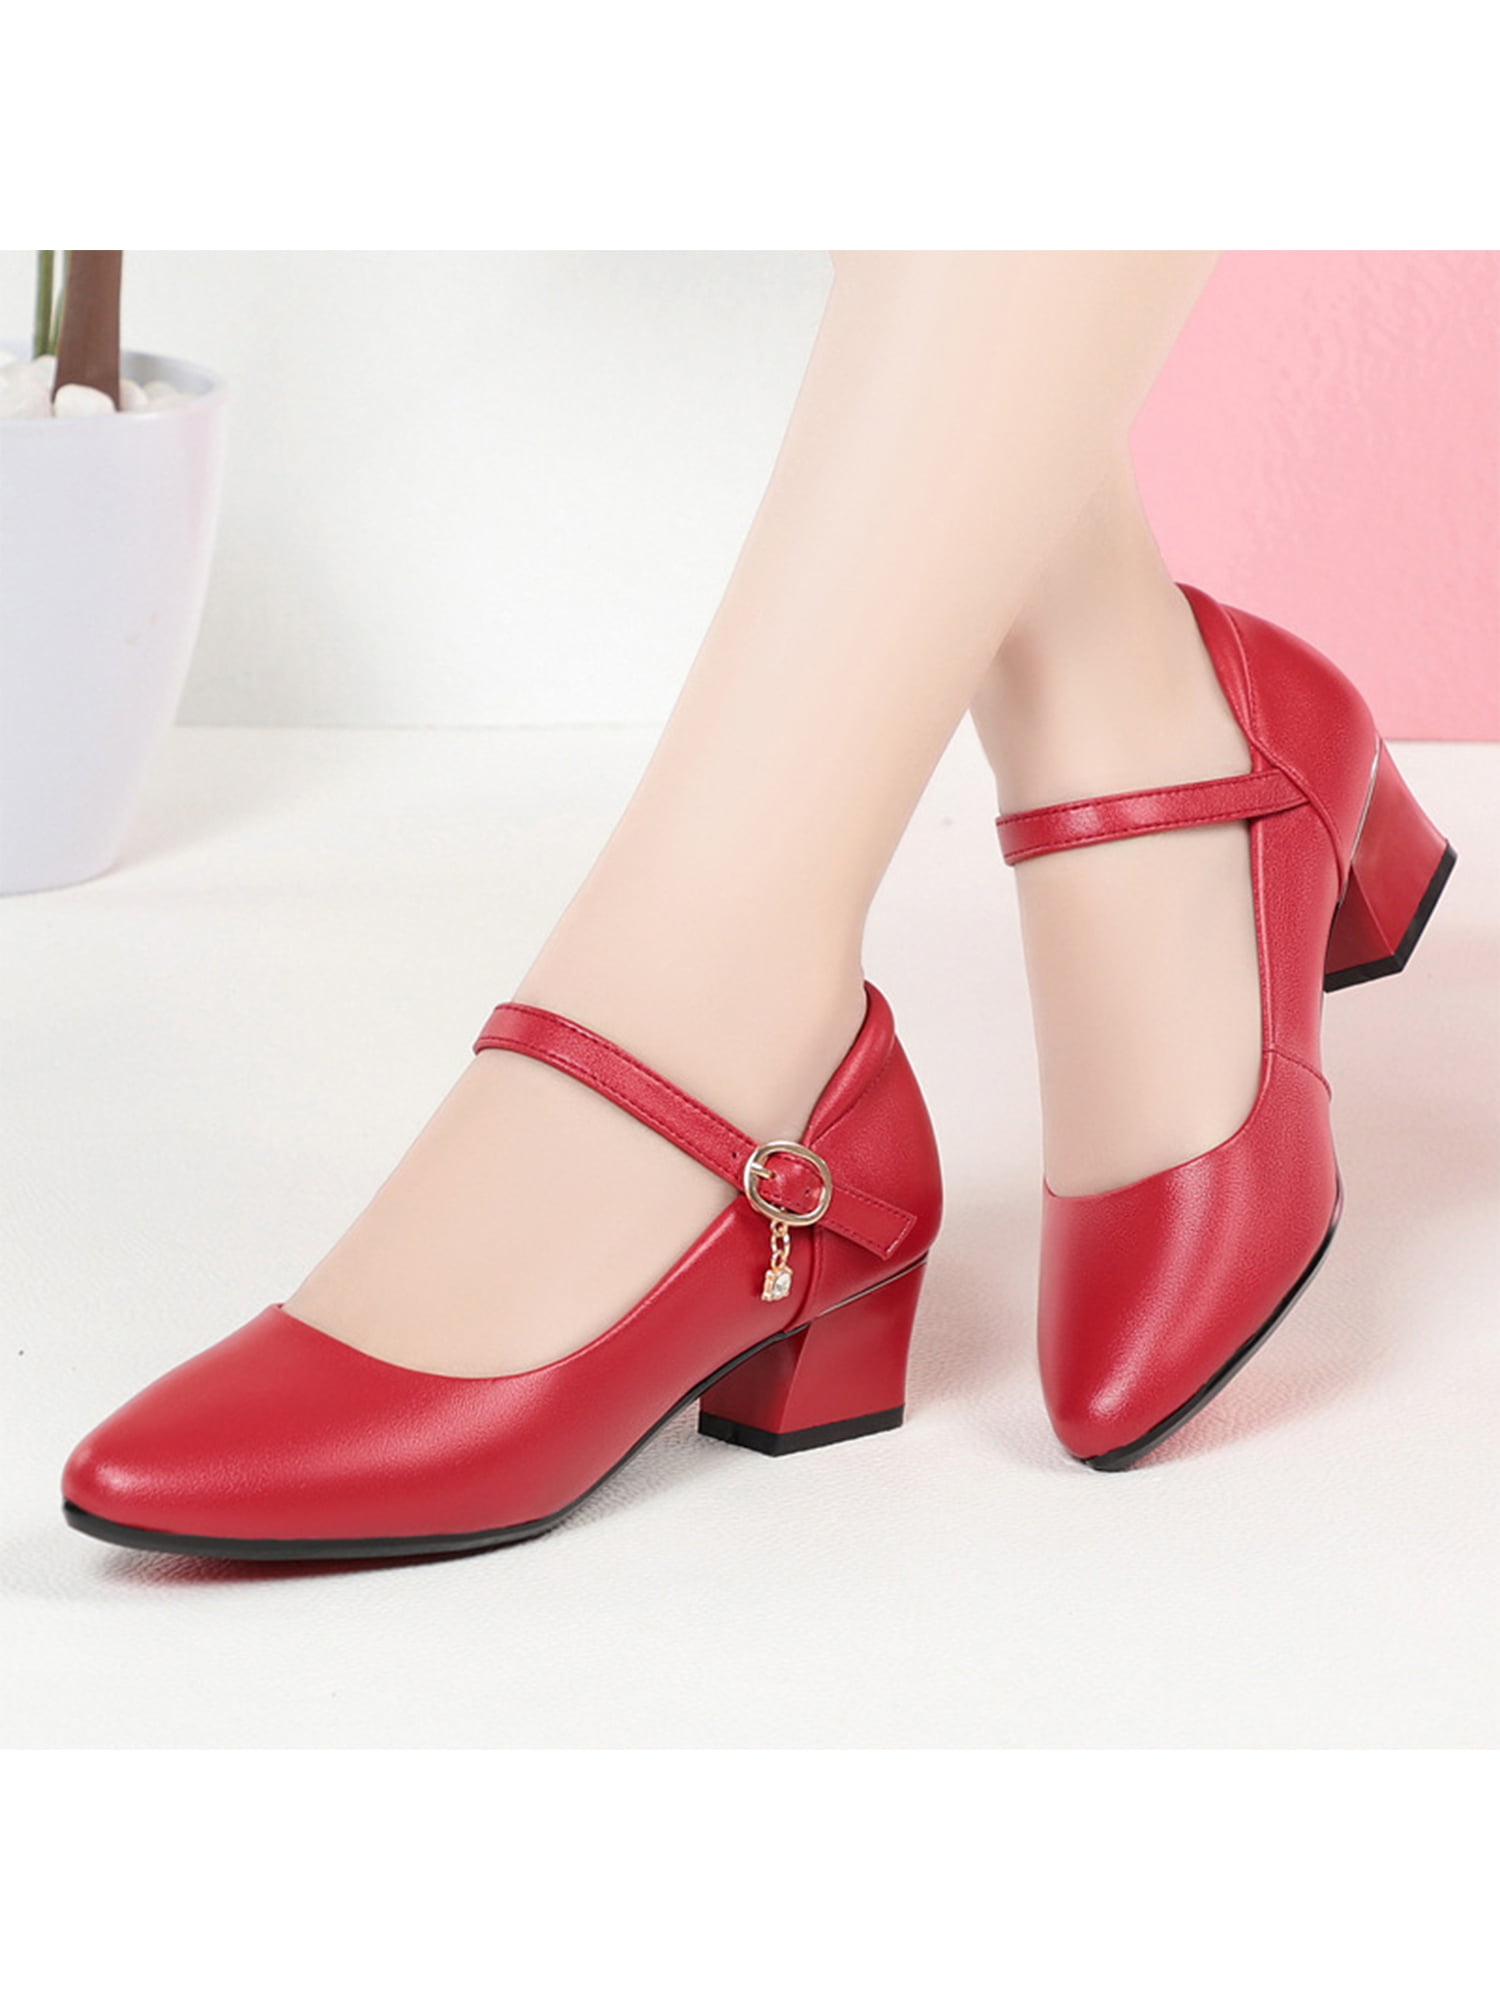 Step Up Your Style with Mary Janes - CHIKO fashion shoes and handbags